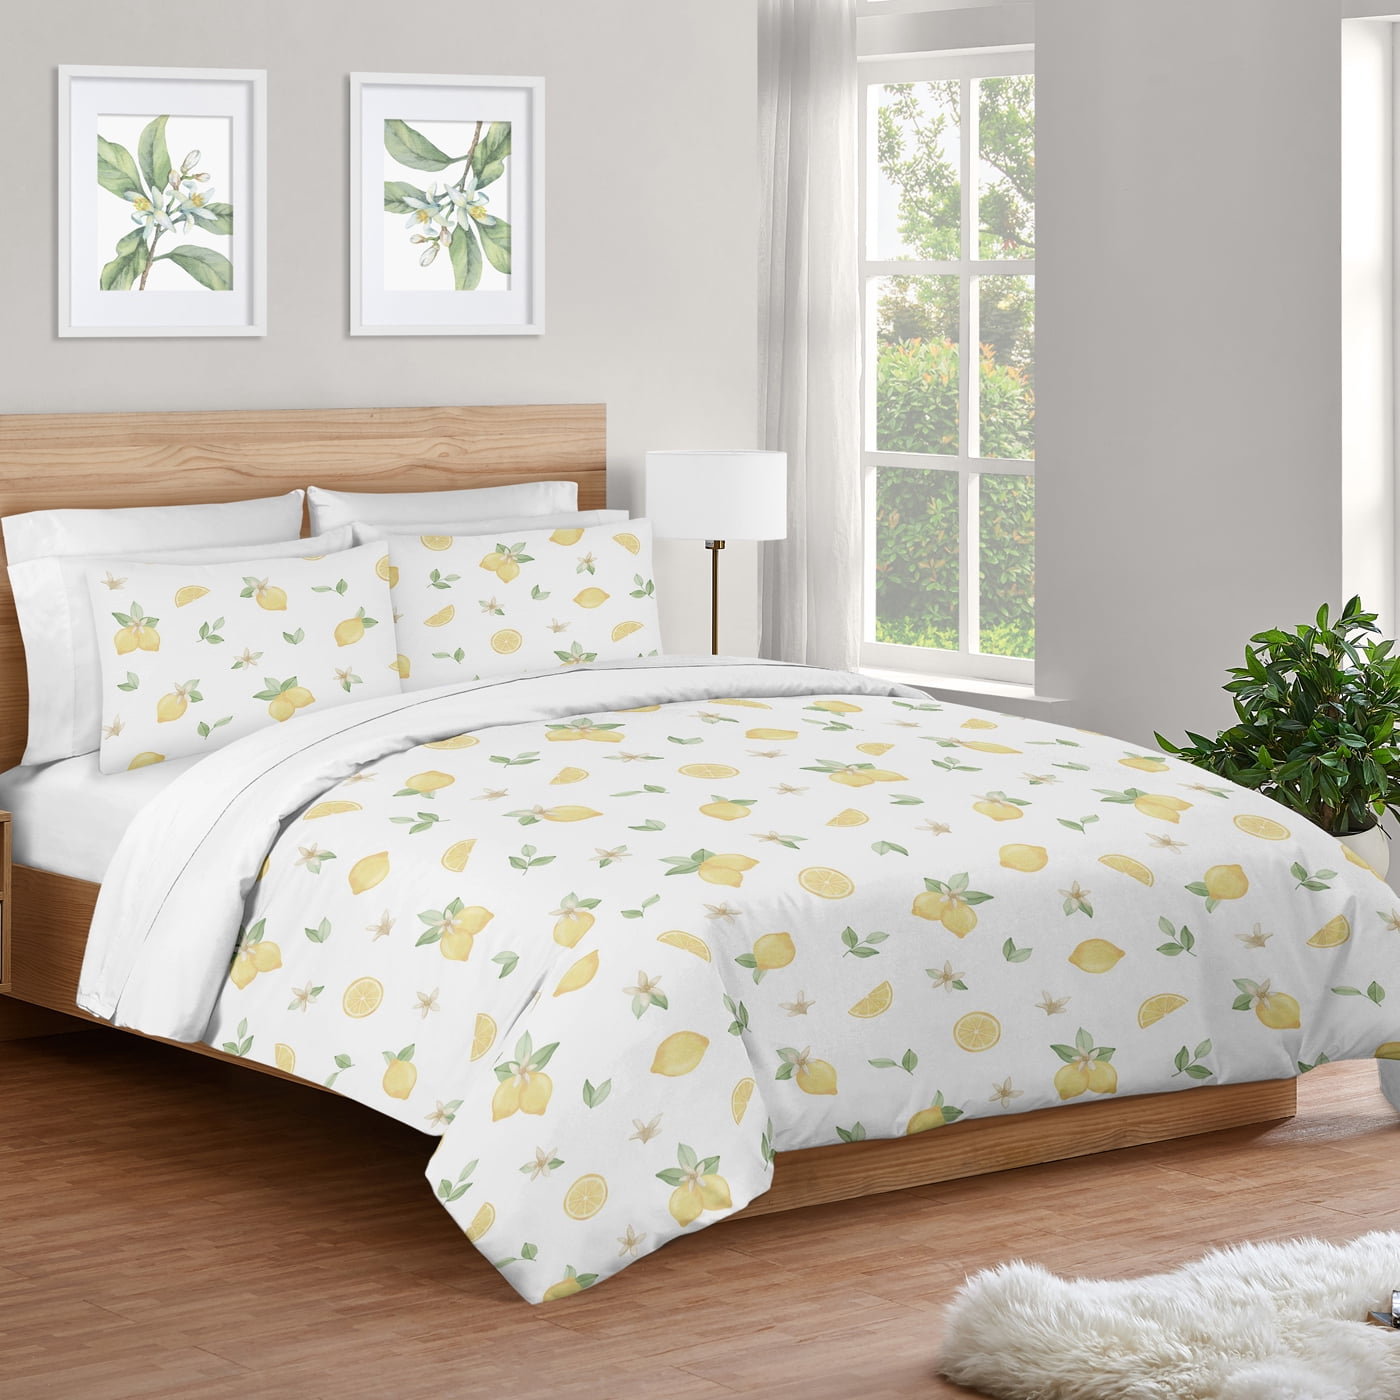 Details about  / Lemon Yellow Floral Blossom Girl Full Queen Bedding Comforter Set by Sweet Jojo